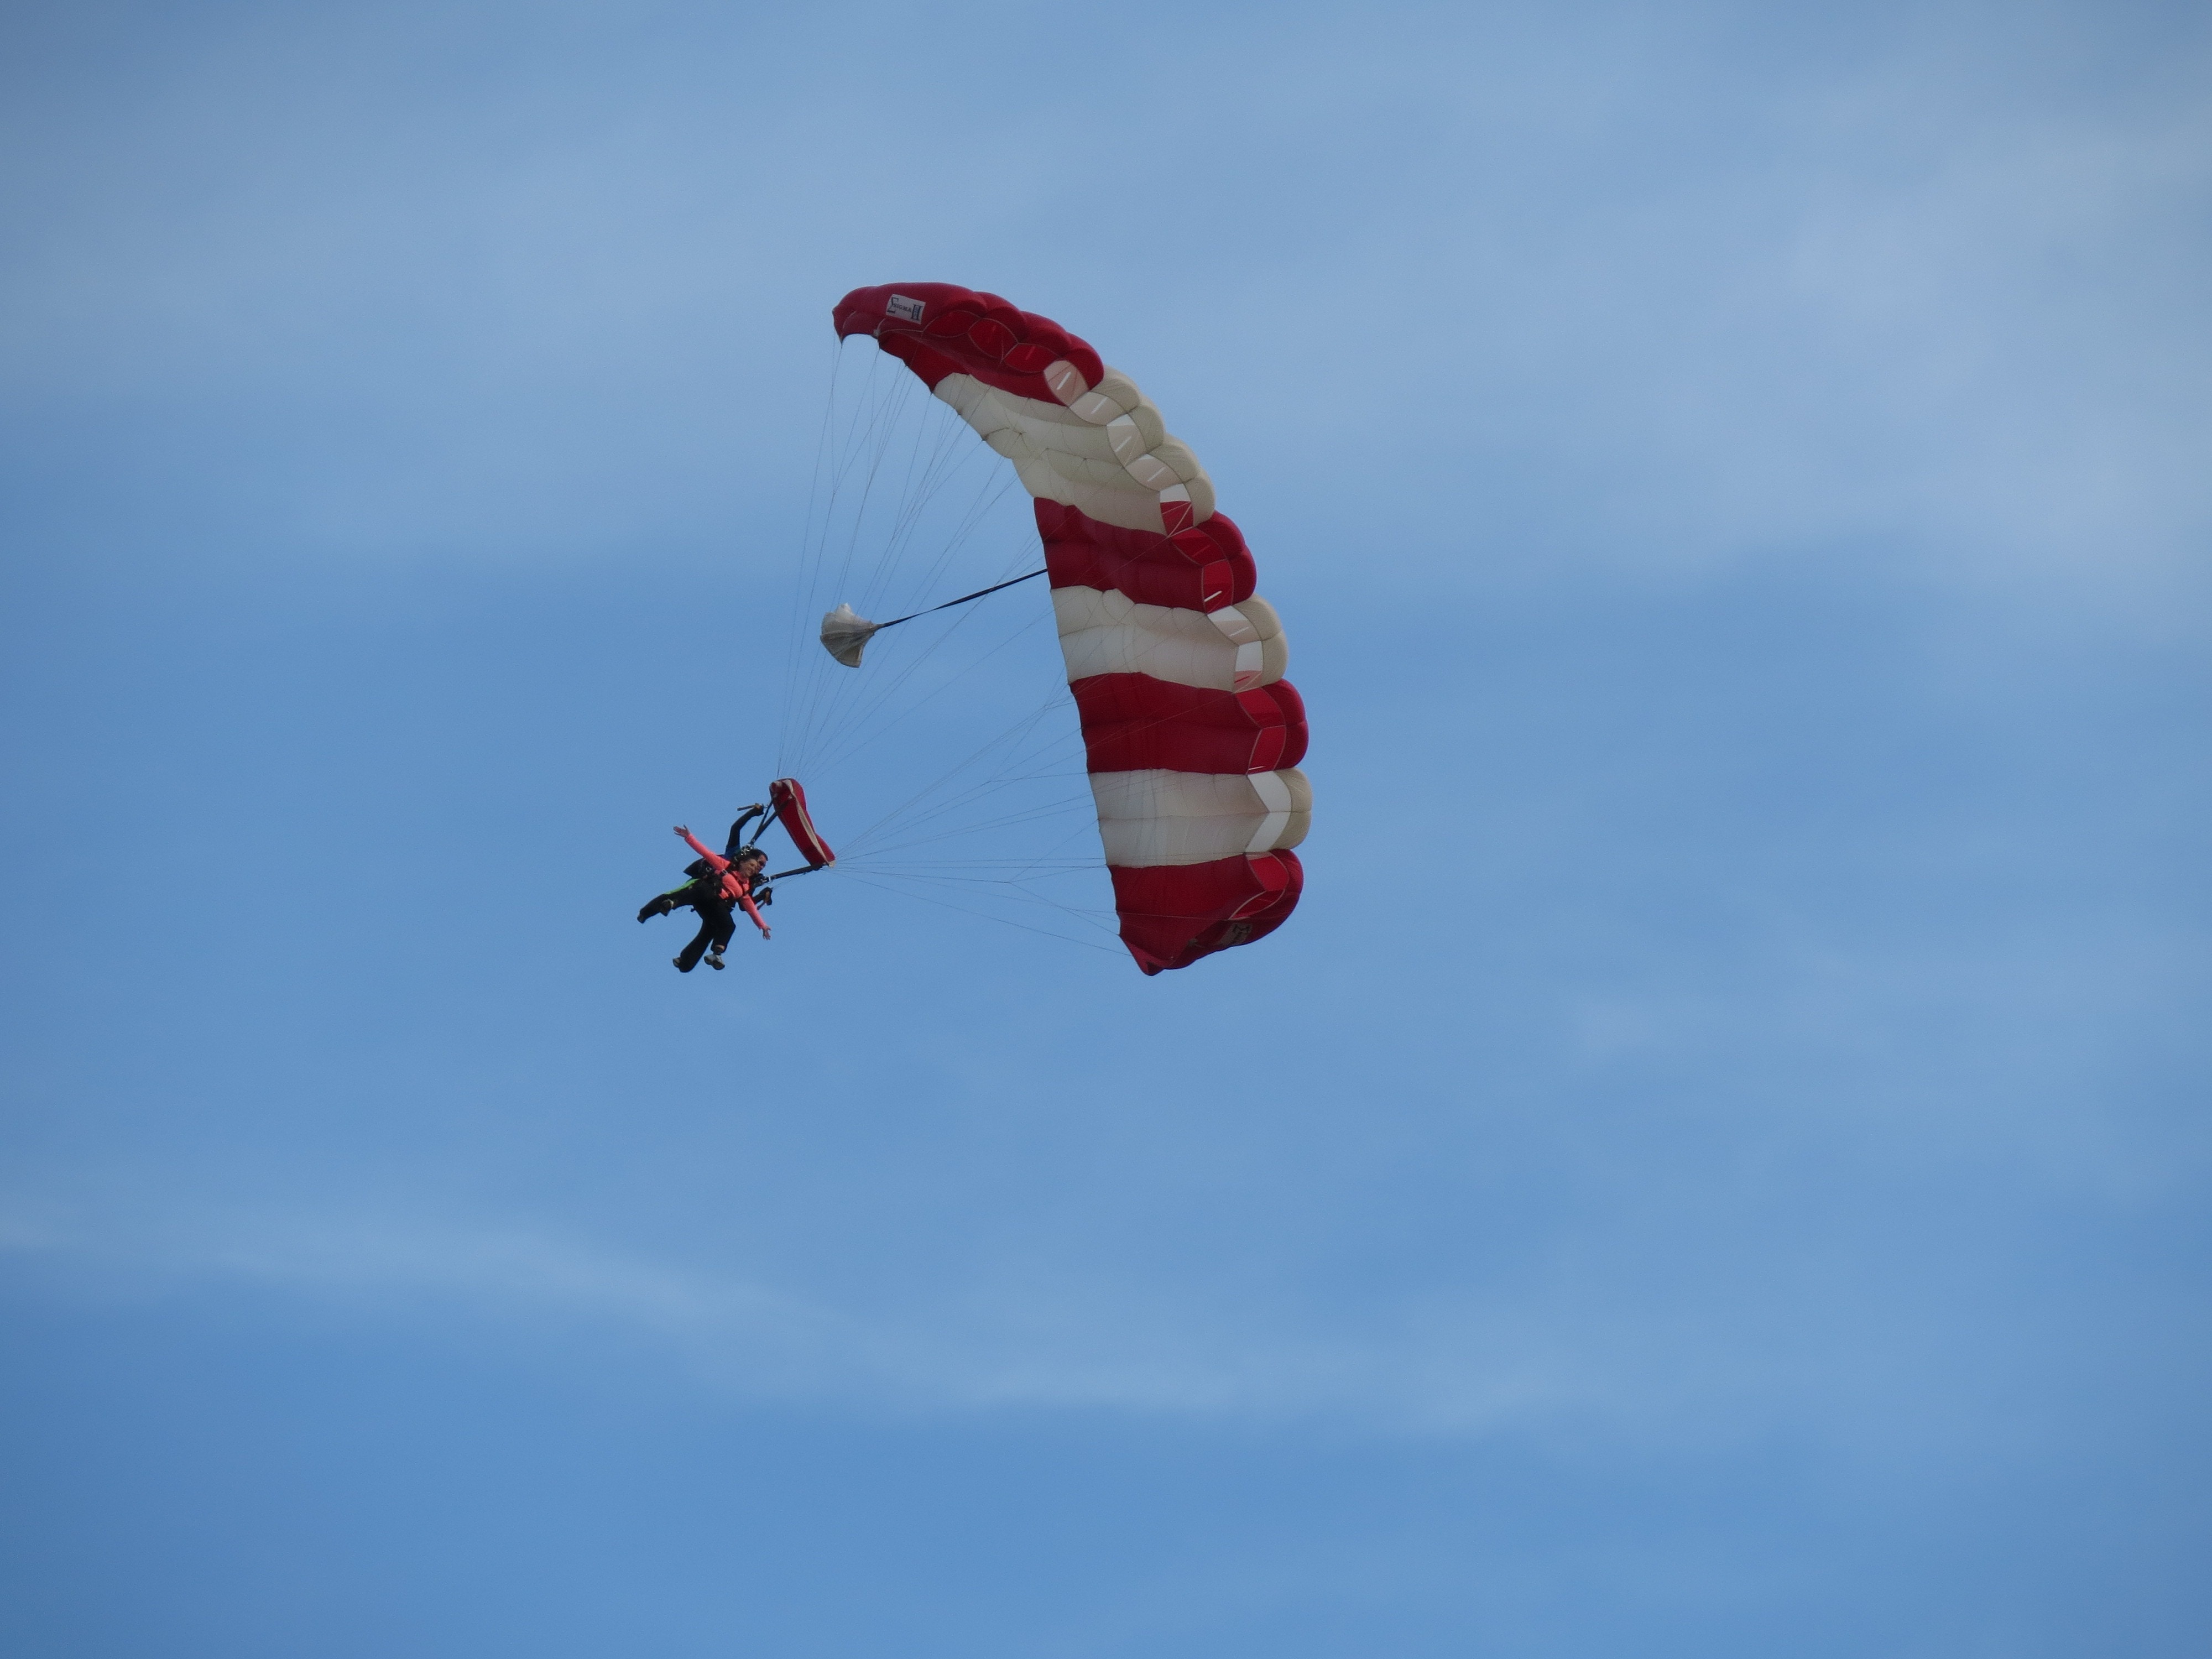 Chatham, Sky, Parachute, Sky Diving, sky, flying